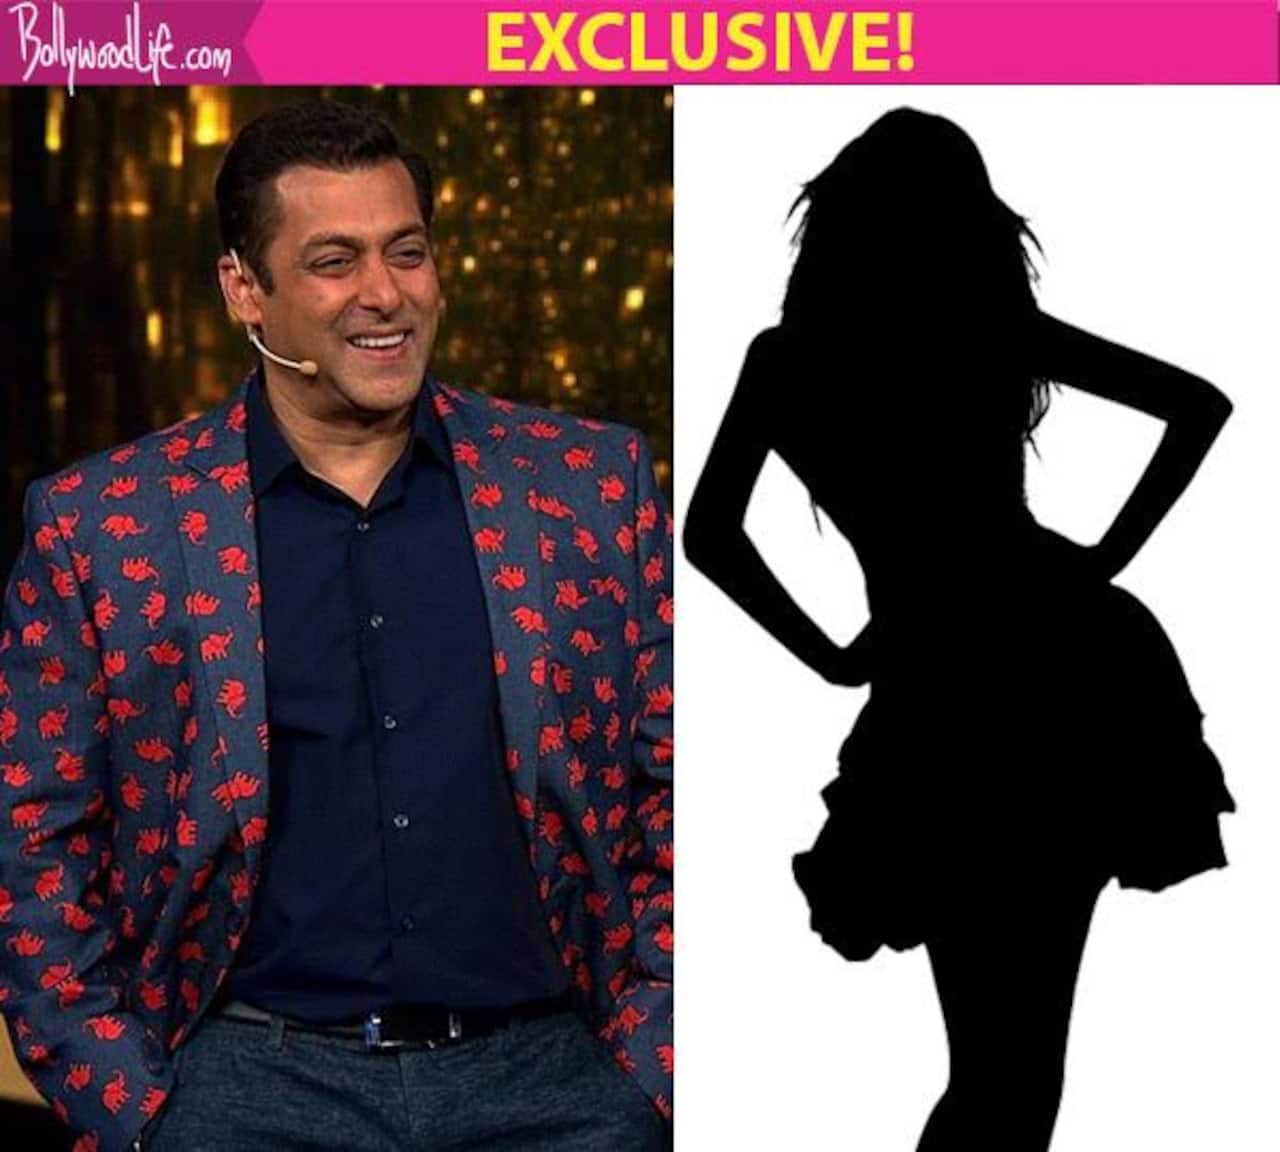 This former Bigg Boss contestant has made shocking revelations about Salman Khan’s biased attitude towards female contestants